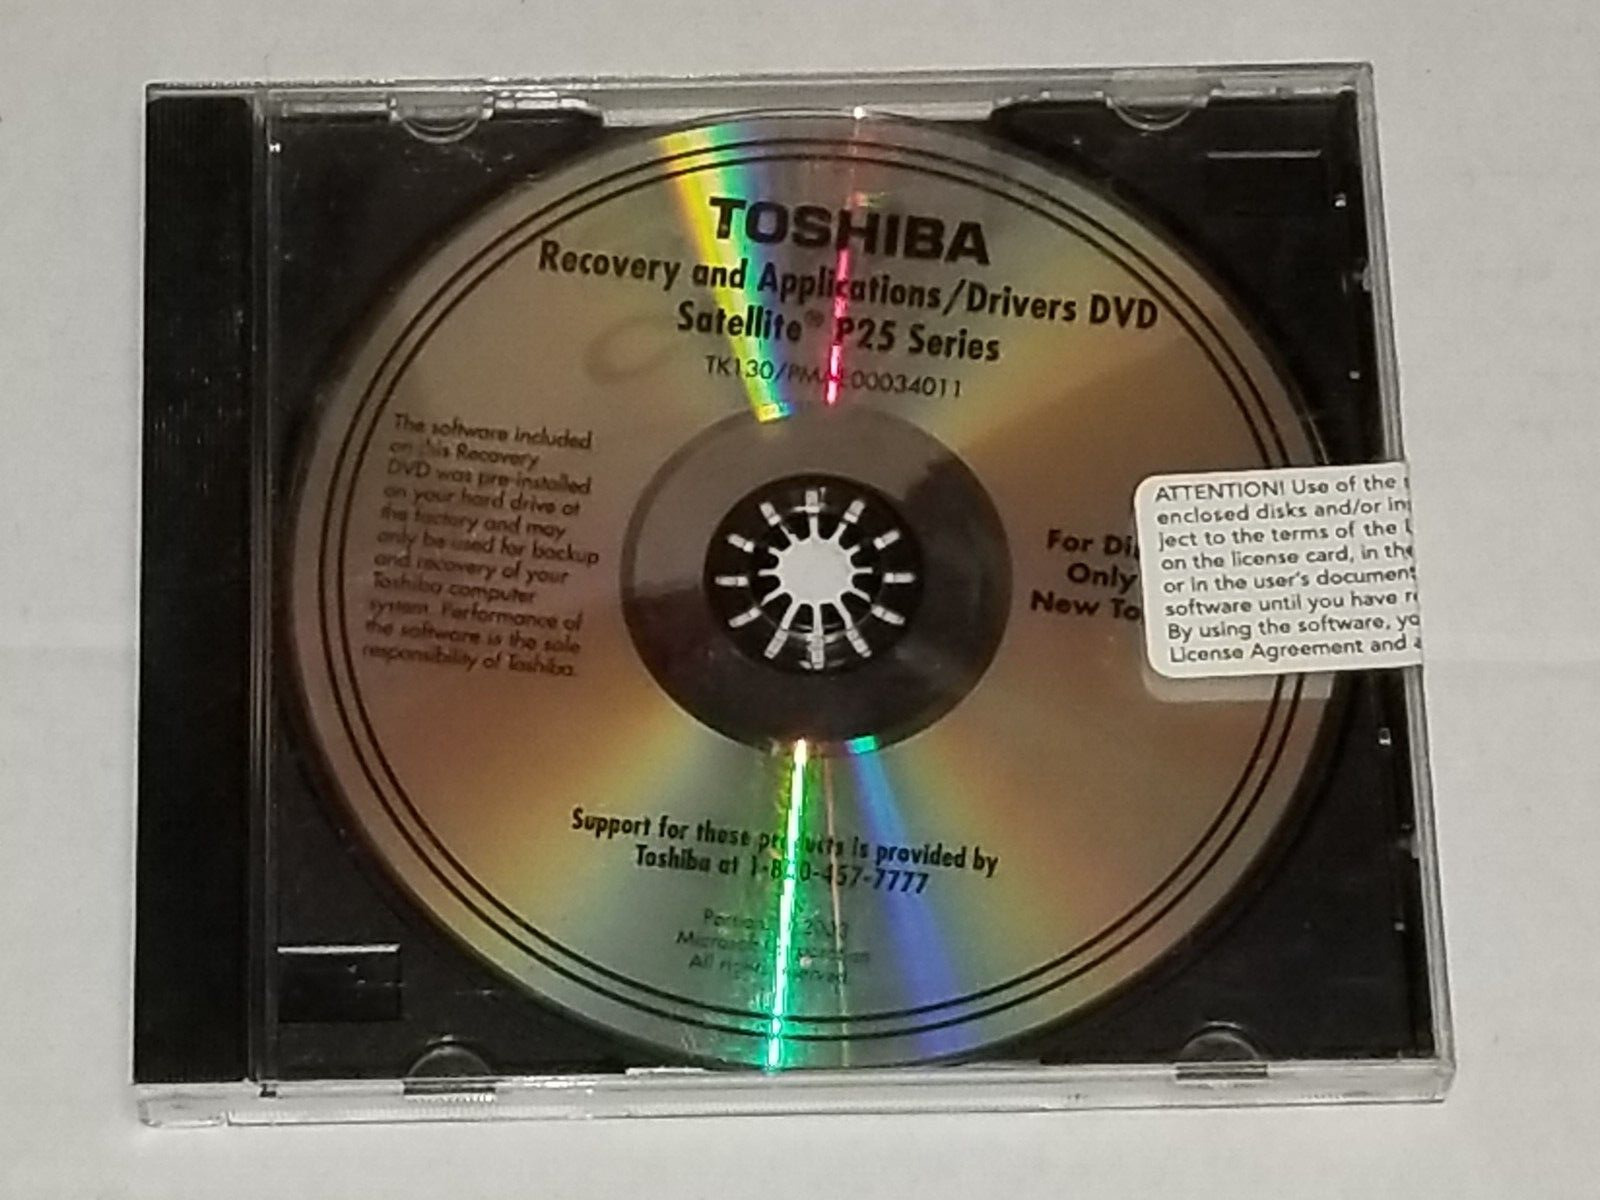 Toshiba Satellite P25 Recovery and Applications Drivers DVD FACTORY SEALED